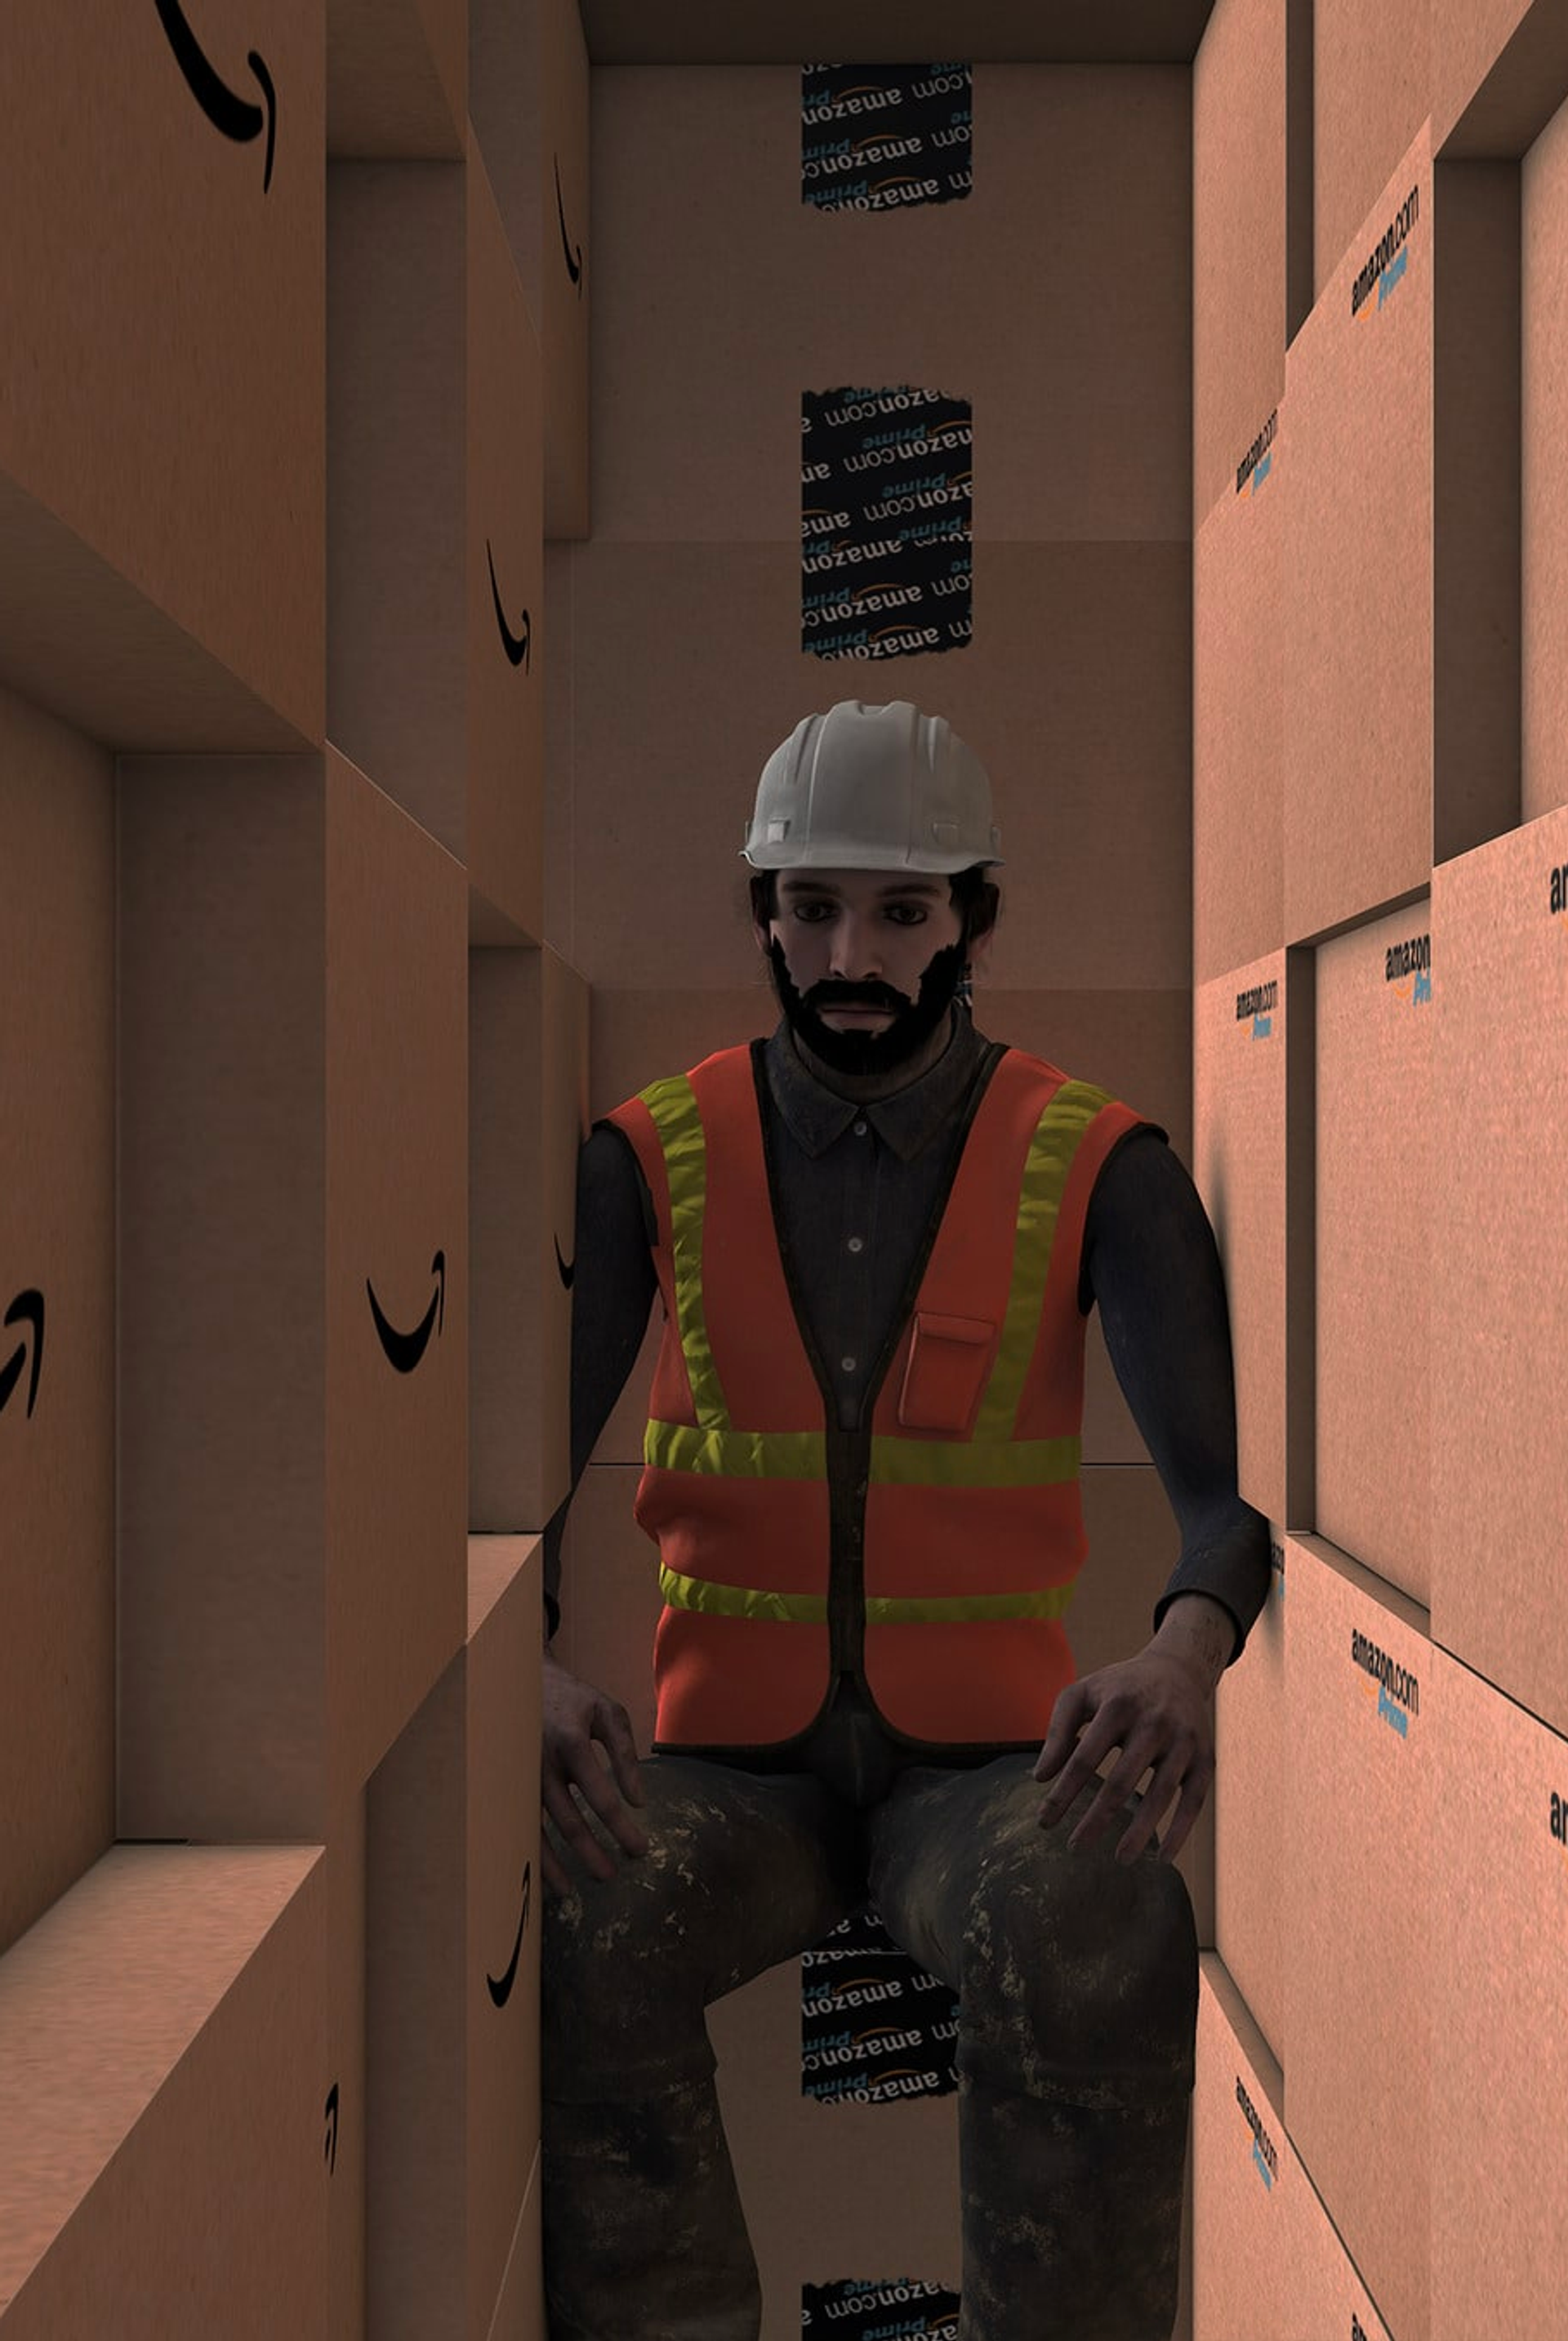 Image of a bearded man wearing an orange high visibility waistcoat and white hard hat, face on, squeezed between tall walls of cardboard boxes with ‘Amazon.com’ printed on them.  By Andreea Iliescu